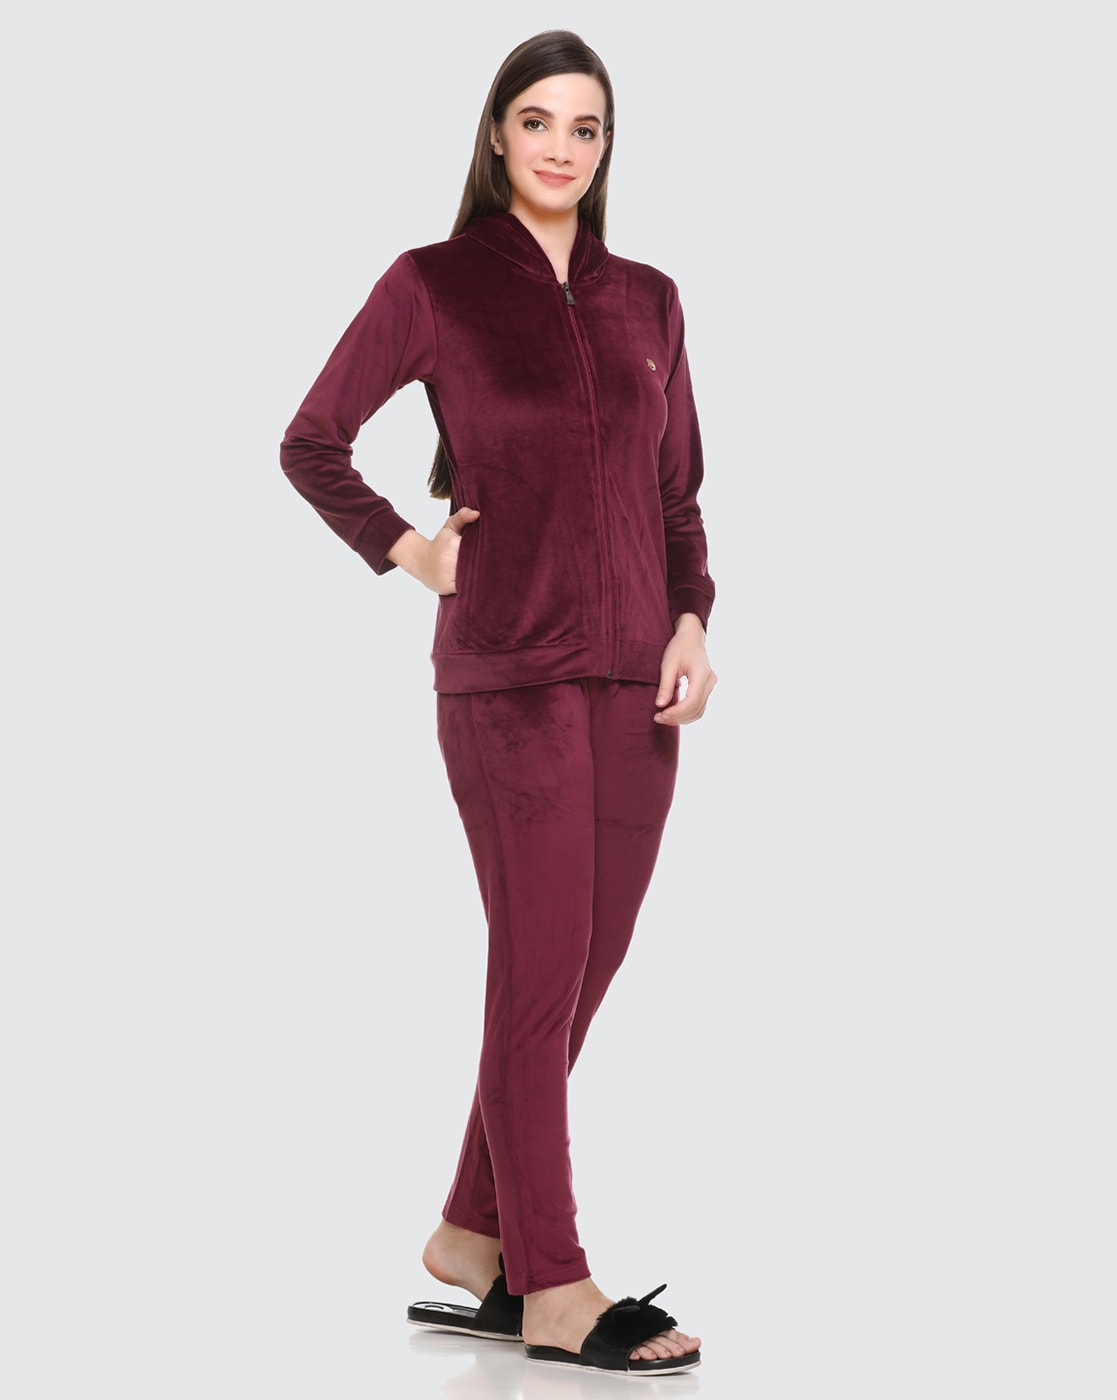 Buy Bumwera Velvet Solid Plan Highly Stretchable Fabric Night Suit, Full  Sleeves Night Wear Pyjama Set for Women/Girls (5XL, Purple) at Amazon.in